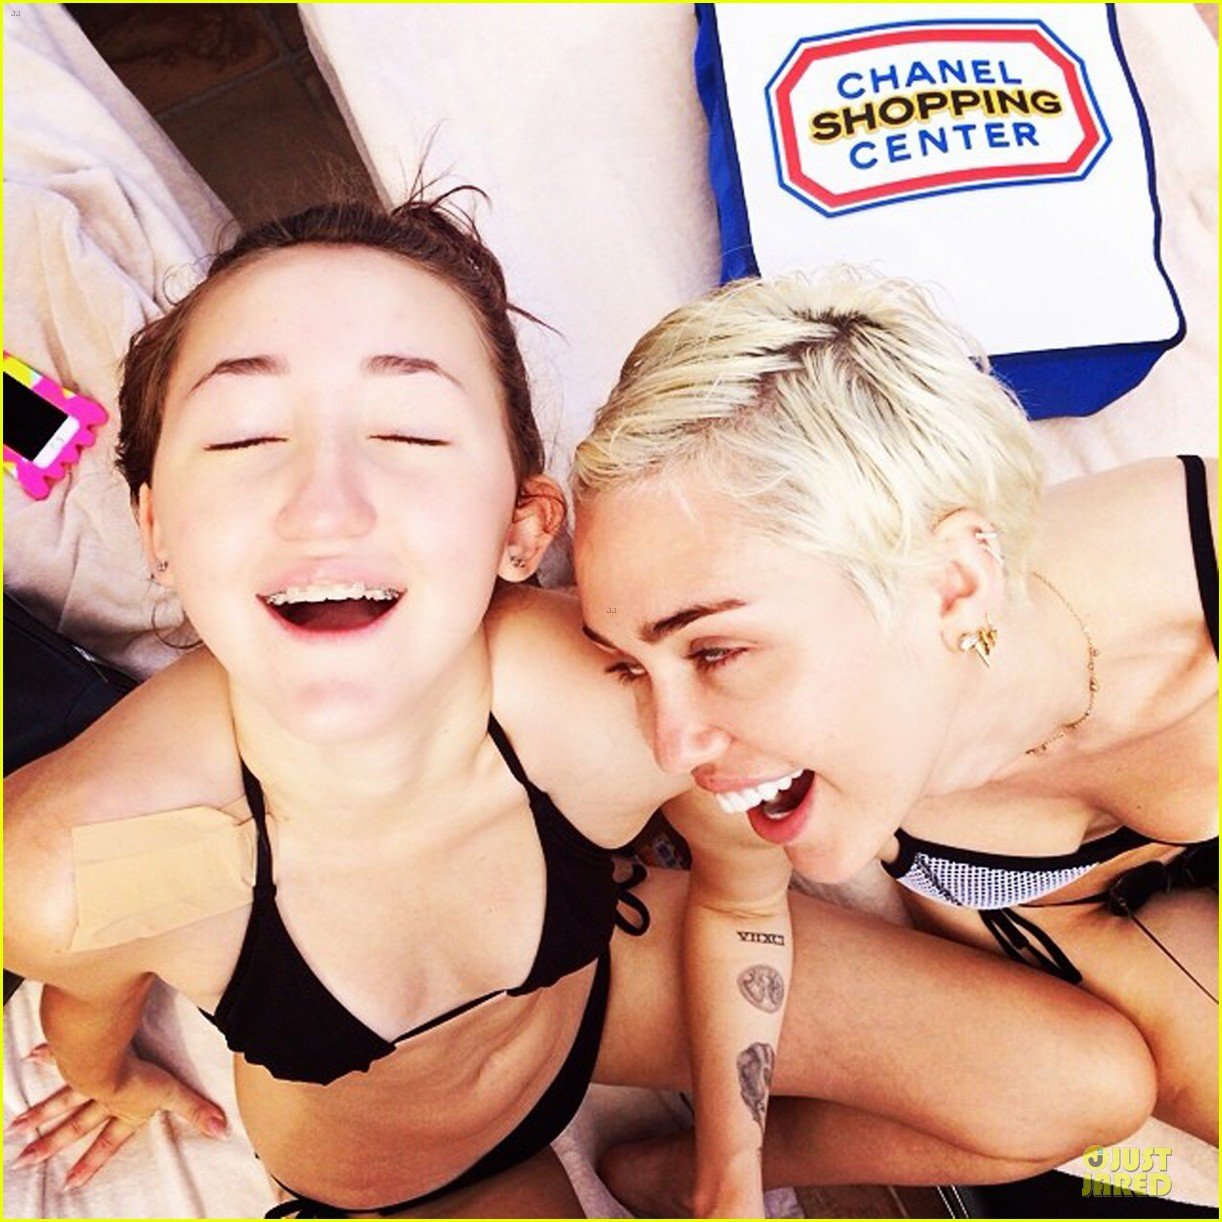 doug lusk recommends miley cyrus sister nude pic